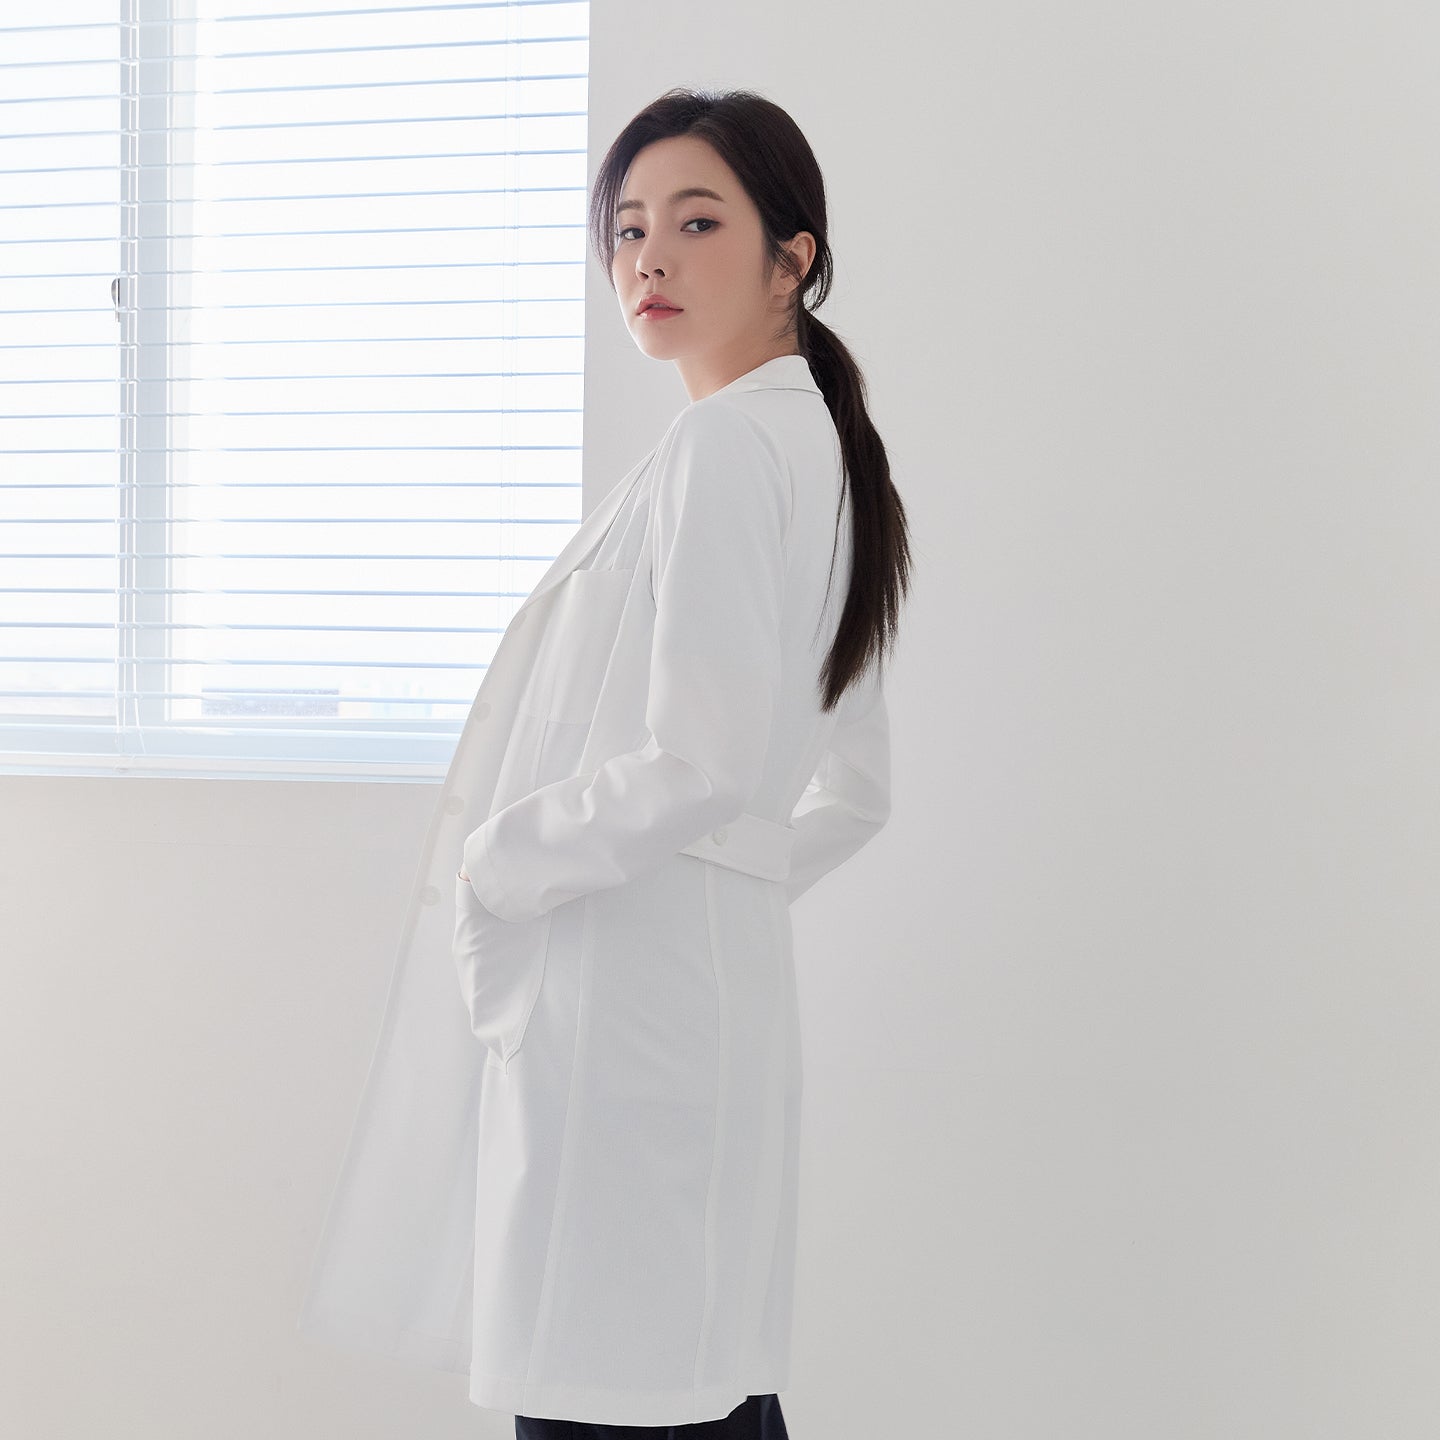 Woman in Zenir White Long Lab Coat LCW-04, side view with hands in pockets, belted back detail,White